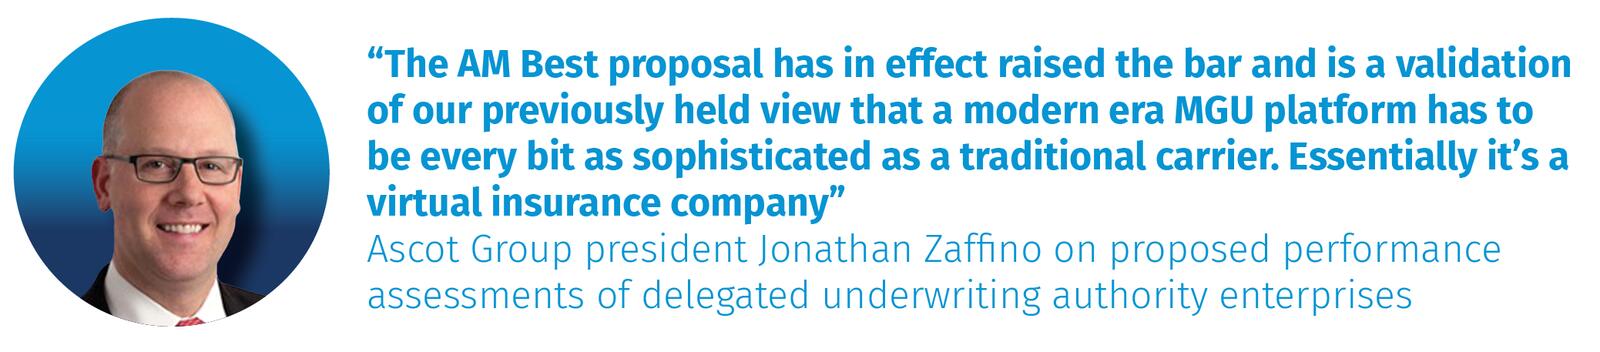 Ascot Group president Jonathan Zaffino on proposed performance assessments of delegated underwriting authority enterprises